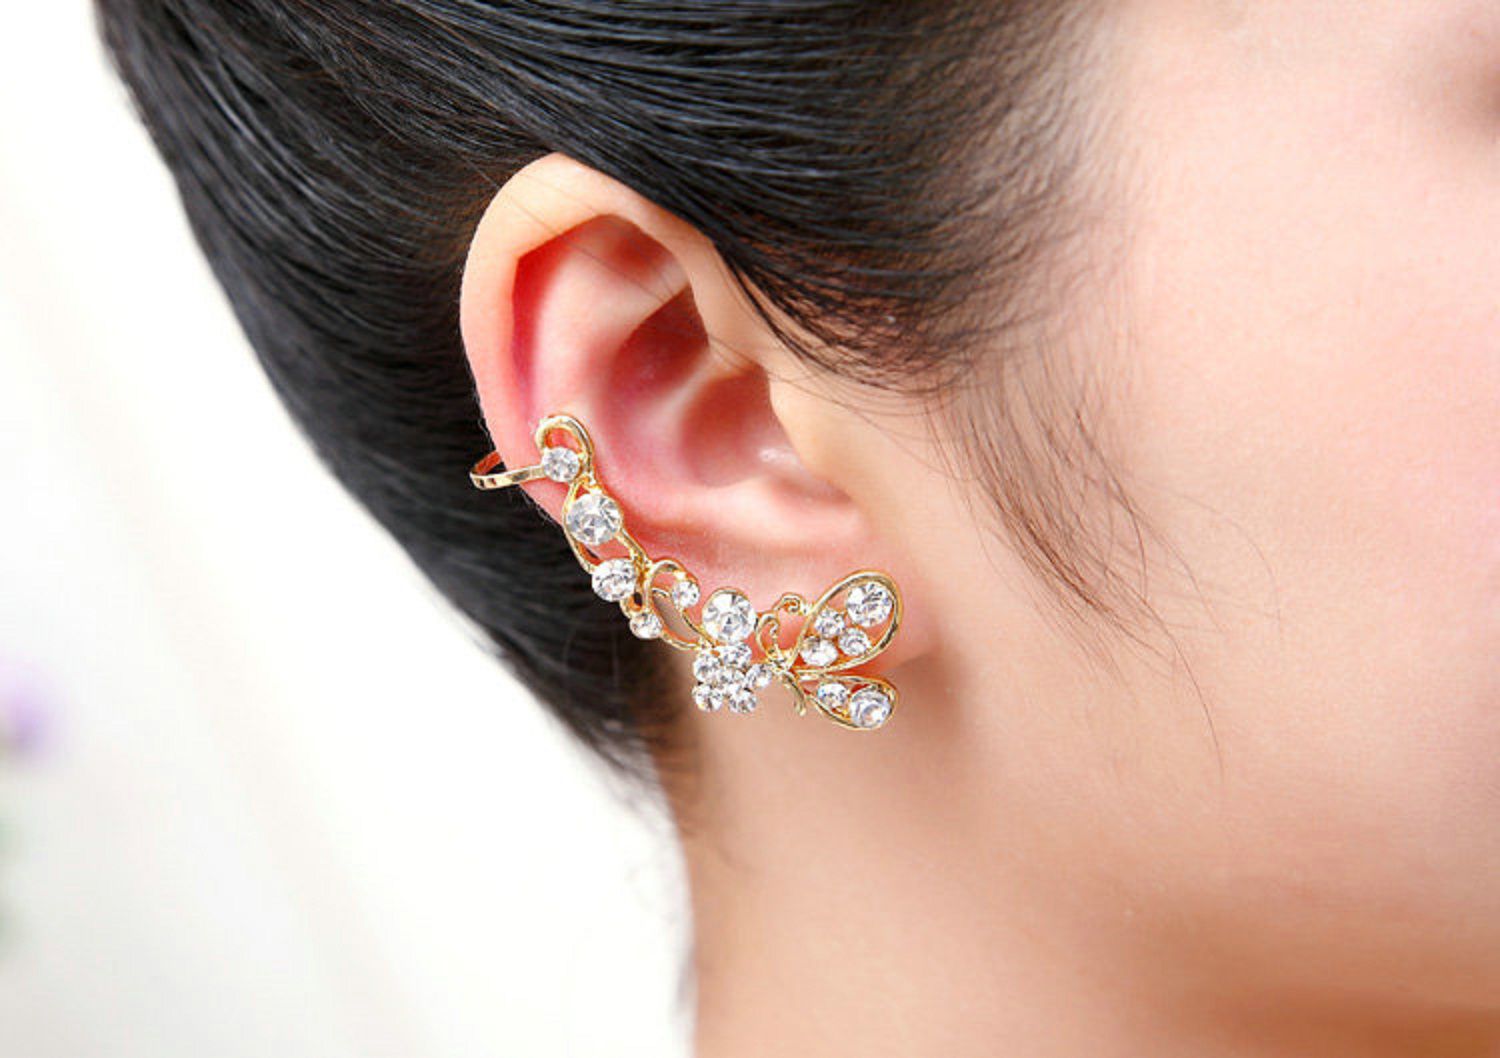 5 Fashionable Ways to Style Ear Cuff Earrings in 2023 - InSerbia News